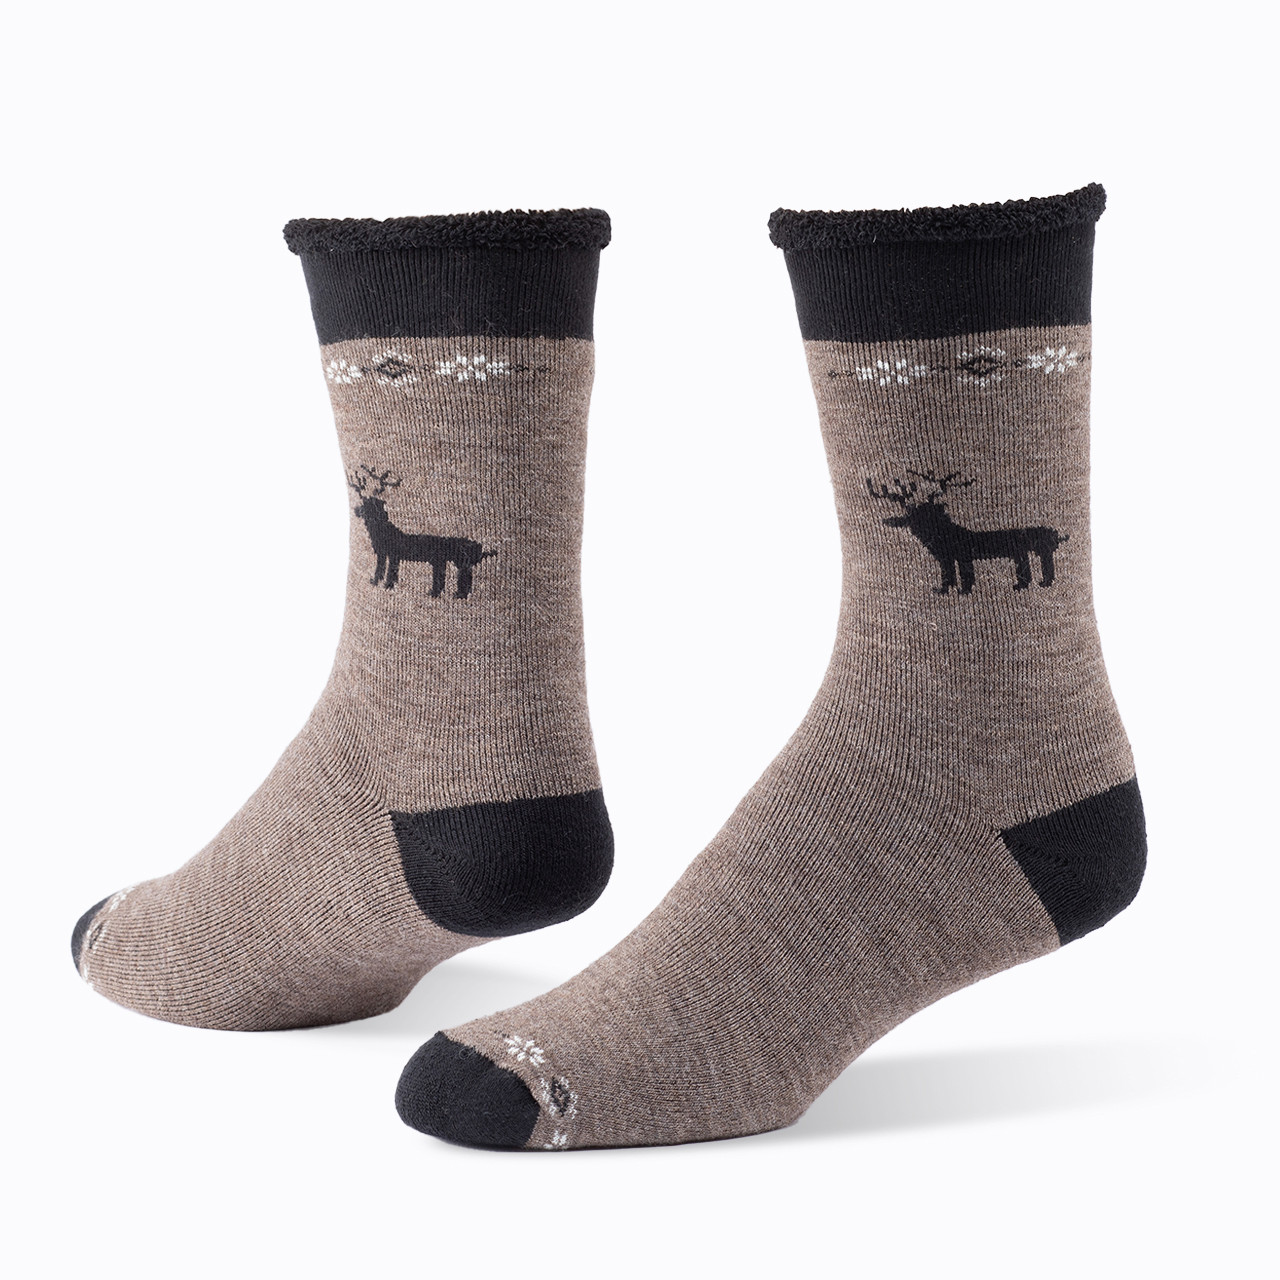 https://cdn11.bigcommerce.com/s-sr2gbw/images/stencil/1280x1280/products/595/19042/2023-Wool-Snuggle-Reindeer-Dove__11948.1710243344.jpg?c=2